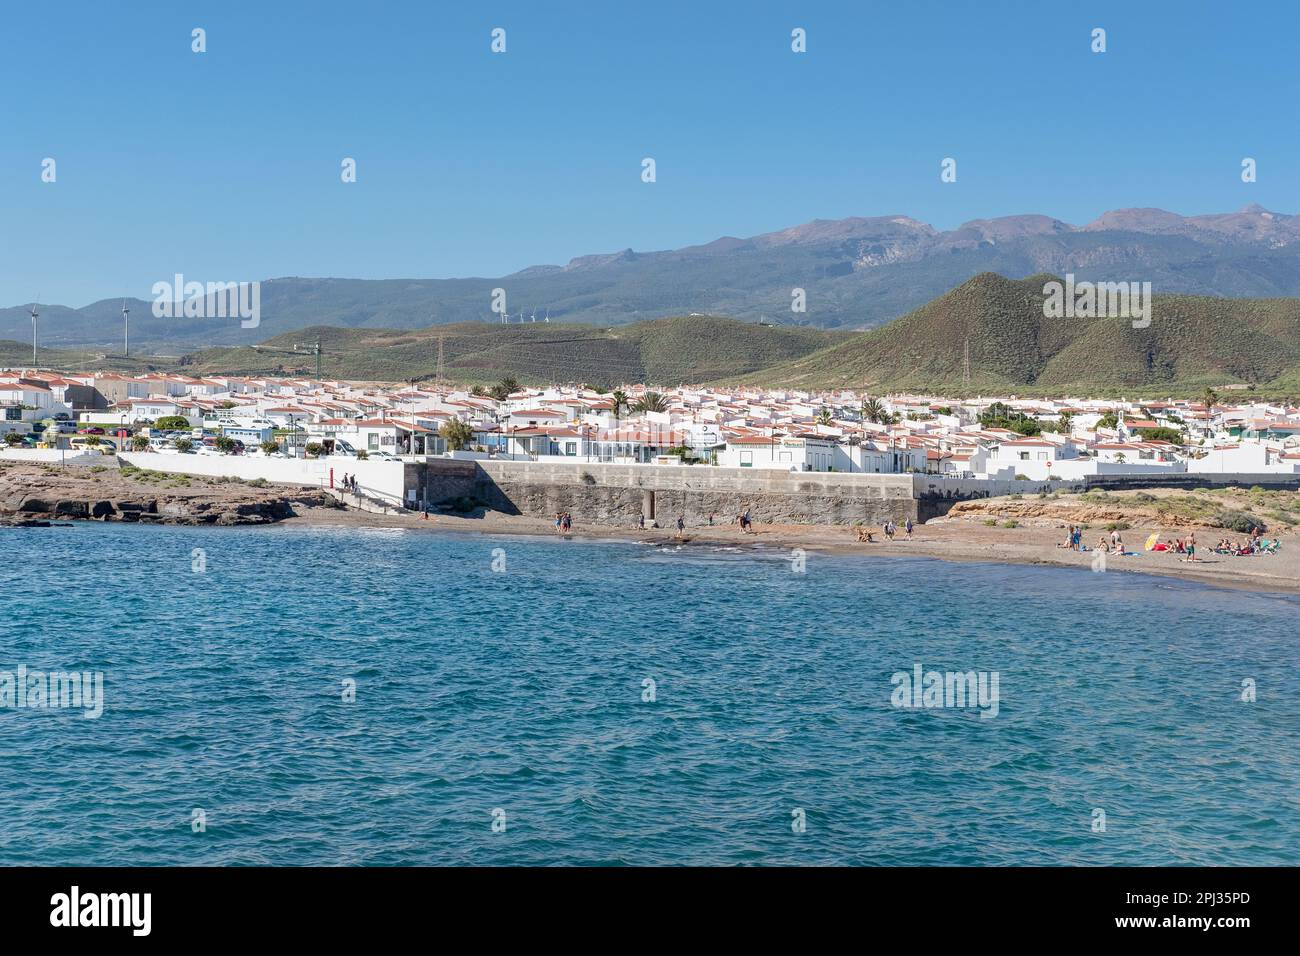 Inland views of the peaceful sleepy town featuring quaint white houses with red rooftops and a small beach visited by few tourists, Abades, Tenerife Stock Photo